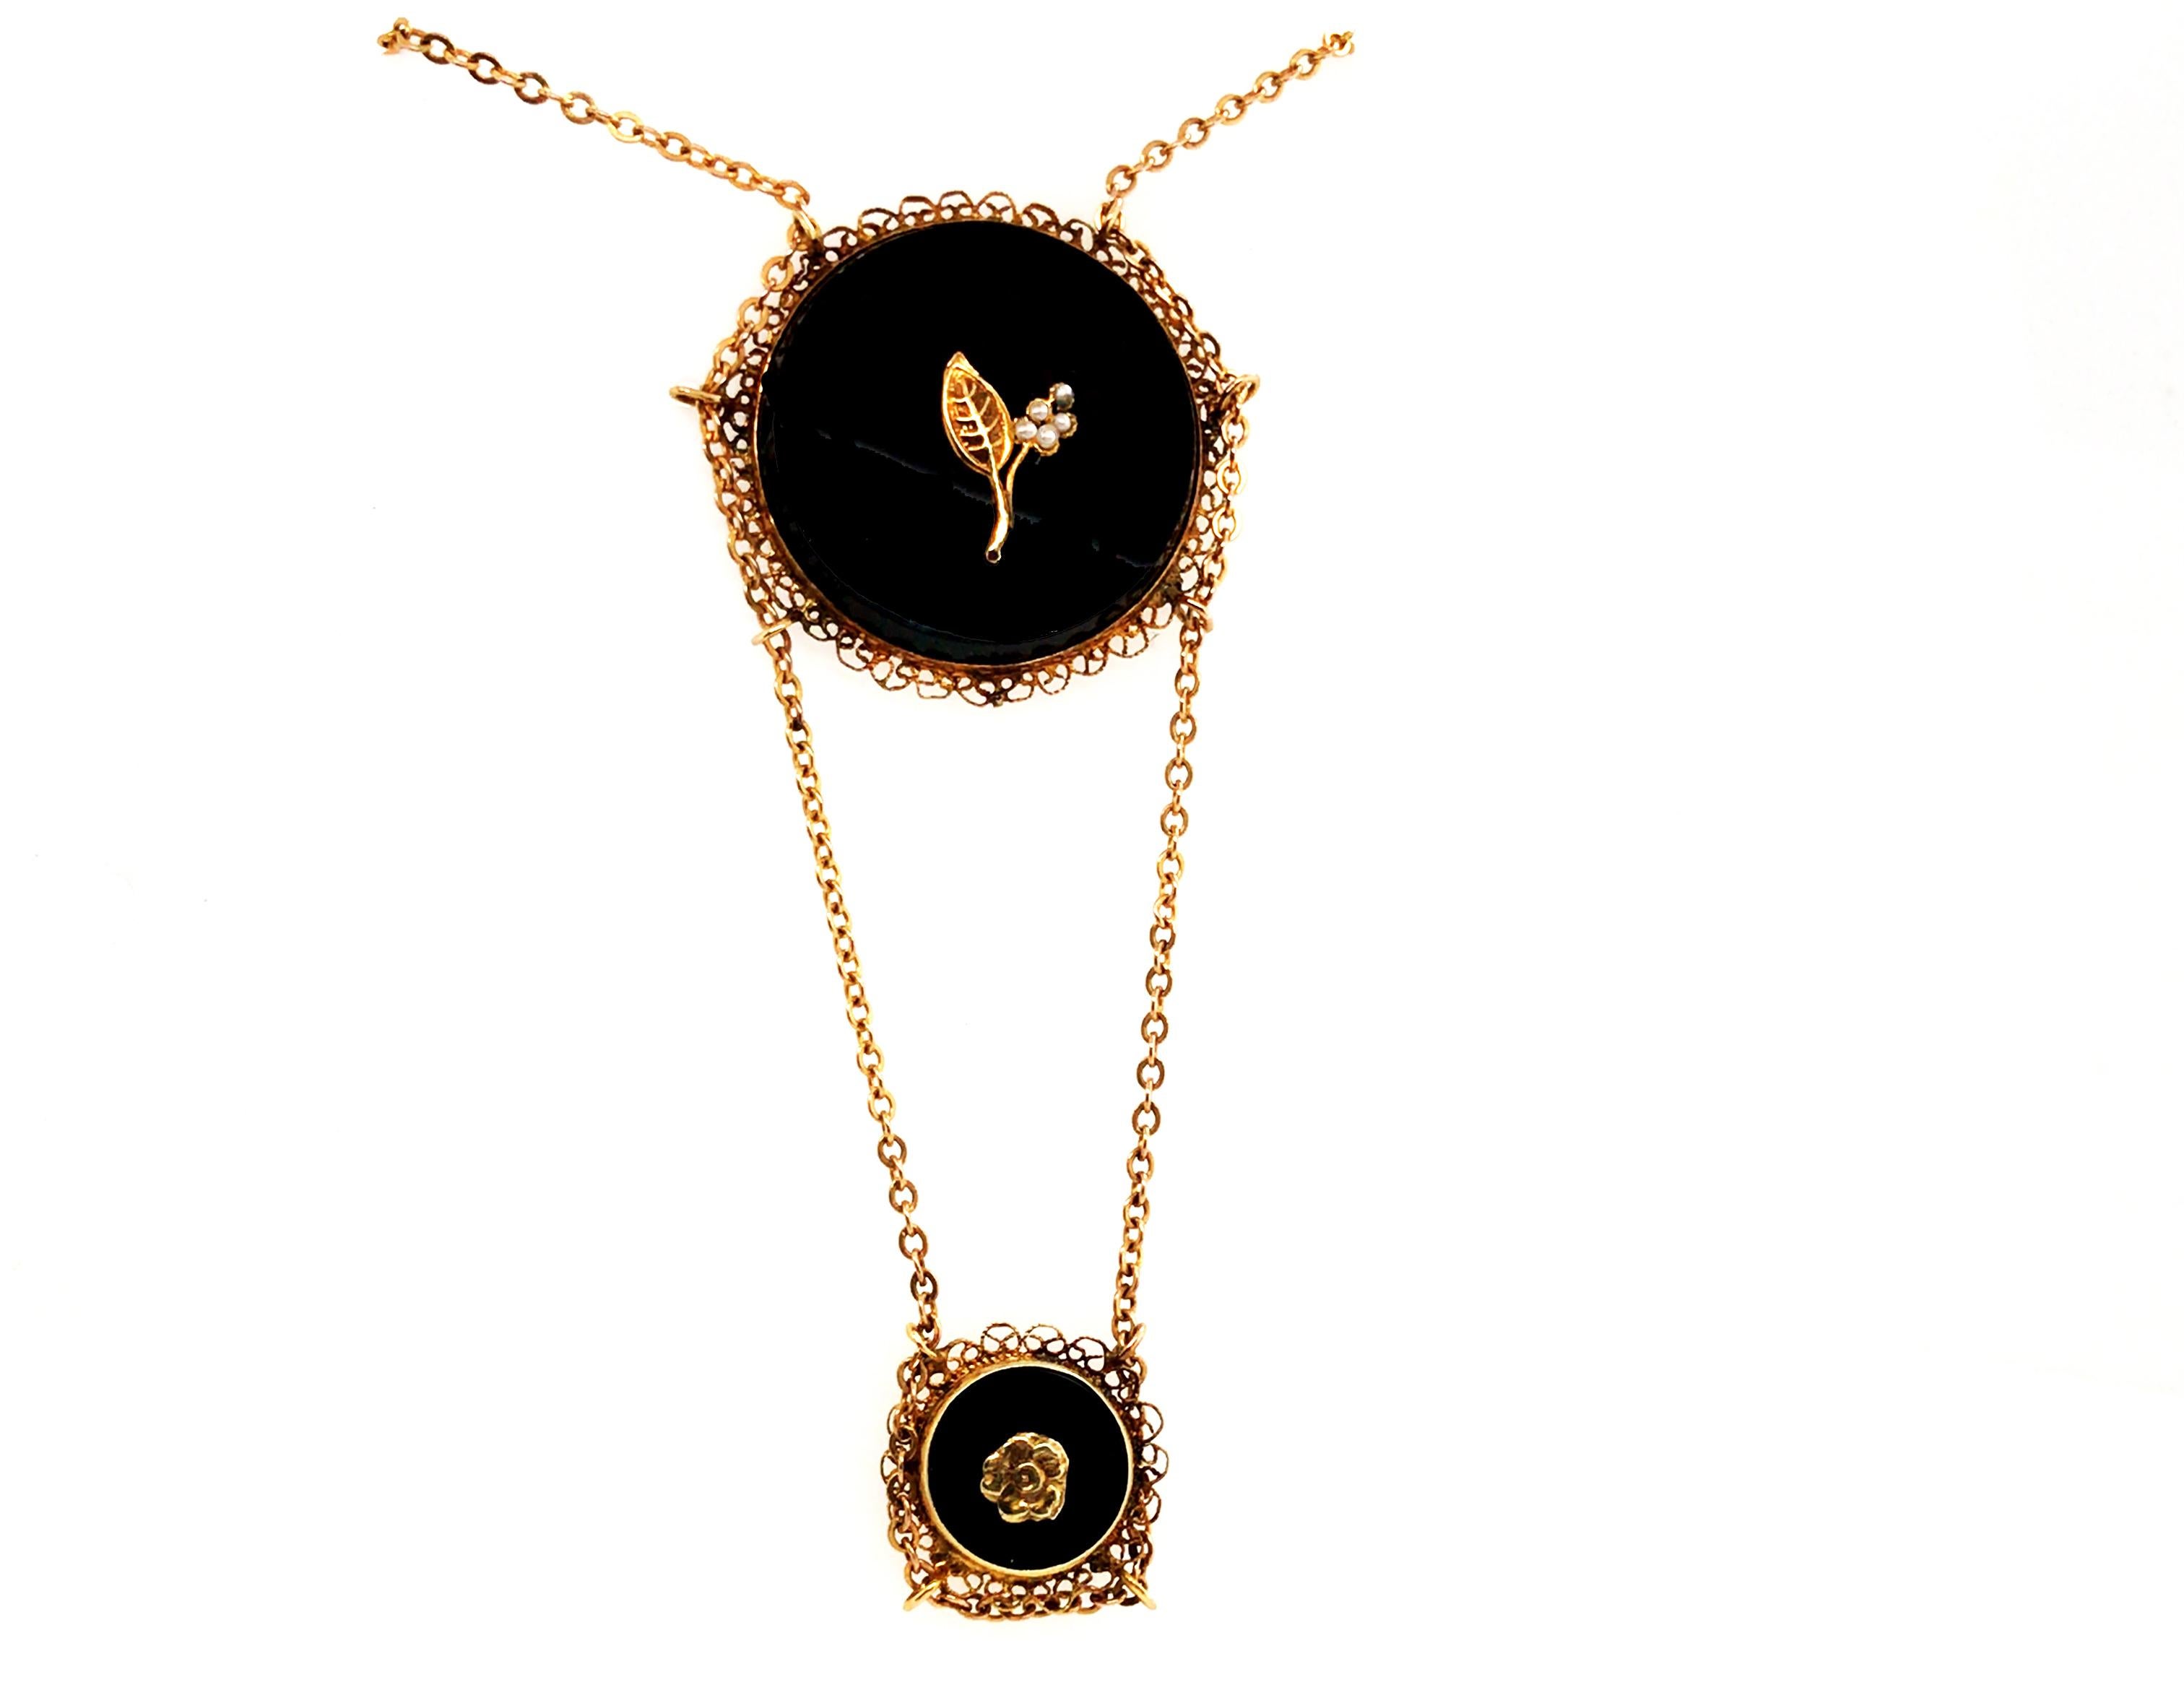 Genuine Original Antique from 1890's Vintage Victorian Onyx Pearl Necklace Double Pendant 14K Yellow Gold


Features a 25mm and 12.5mm Natural Round Onyx Gemstone

Fabulous Victorian Pendant Necklace 

A True Work of Art 

Hand Made Detailing

Solid